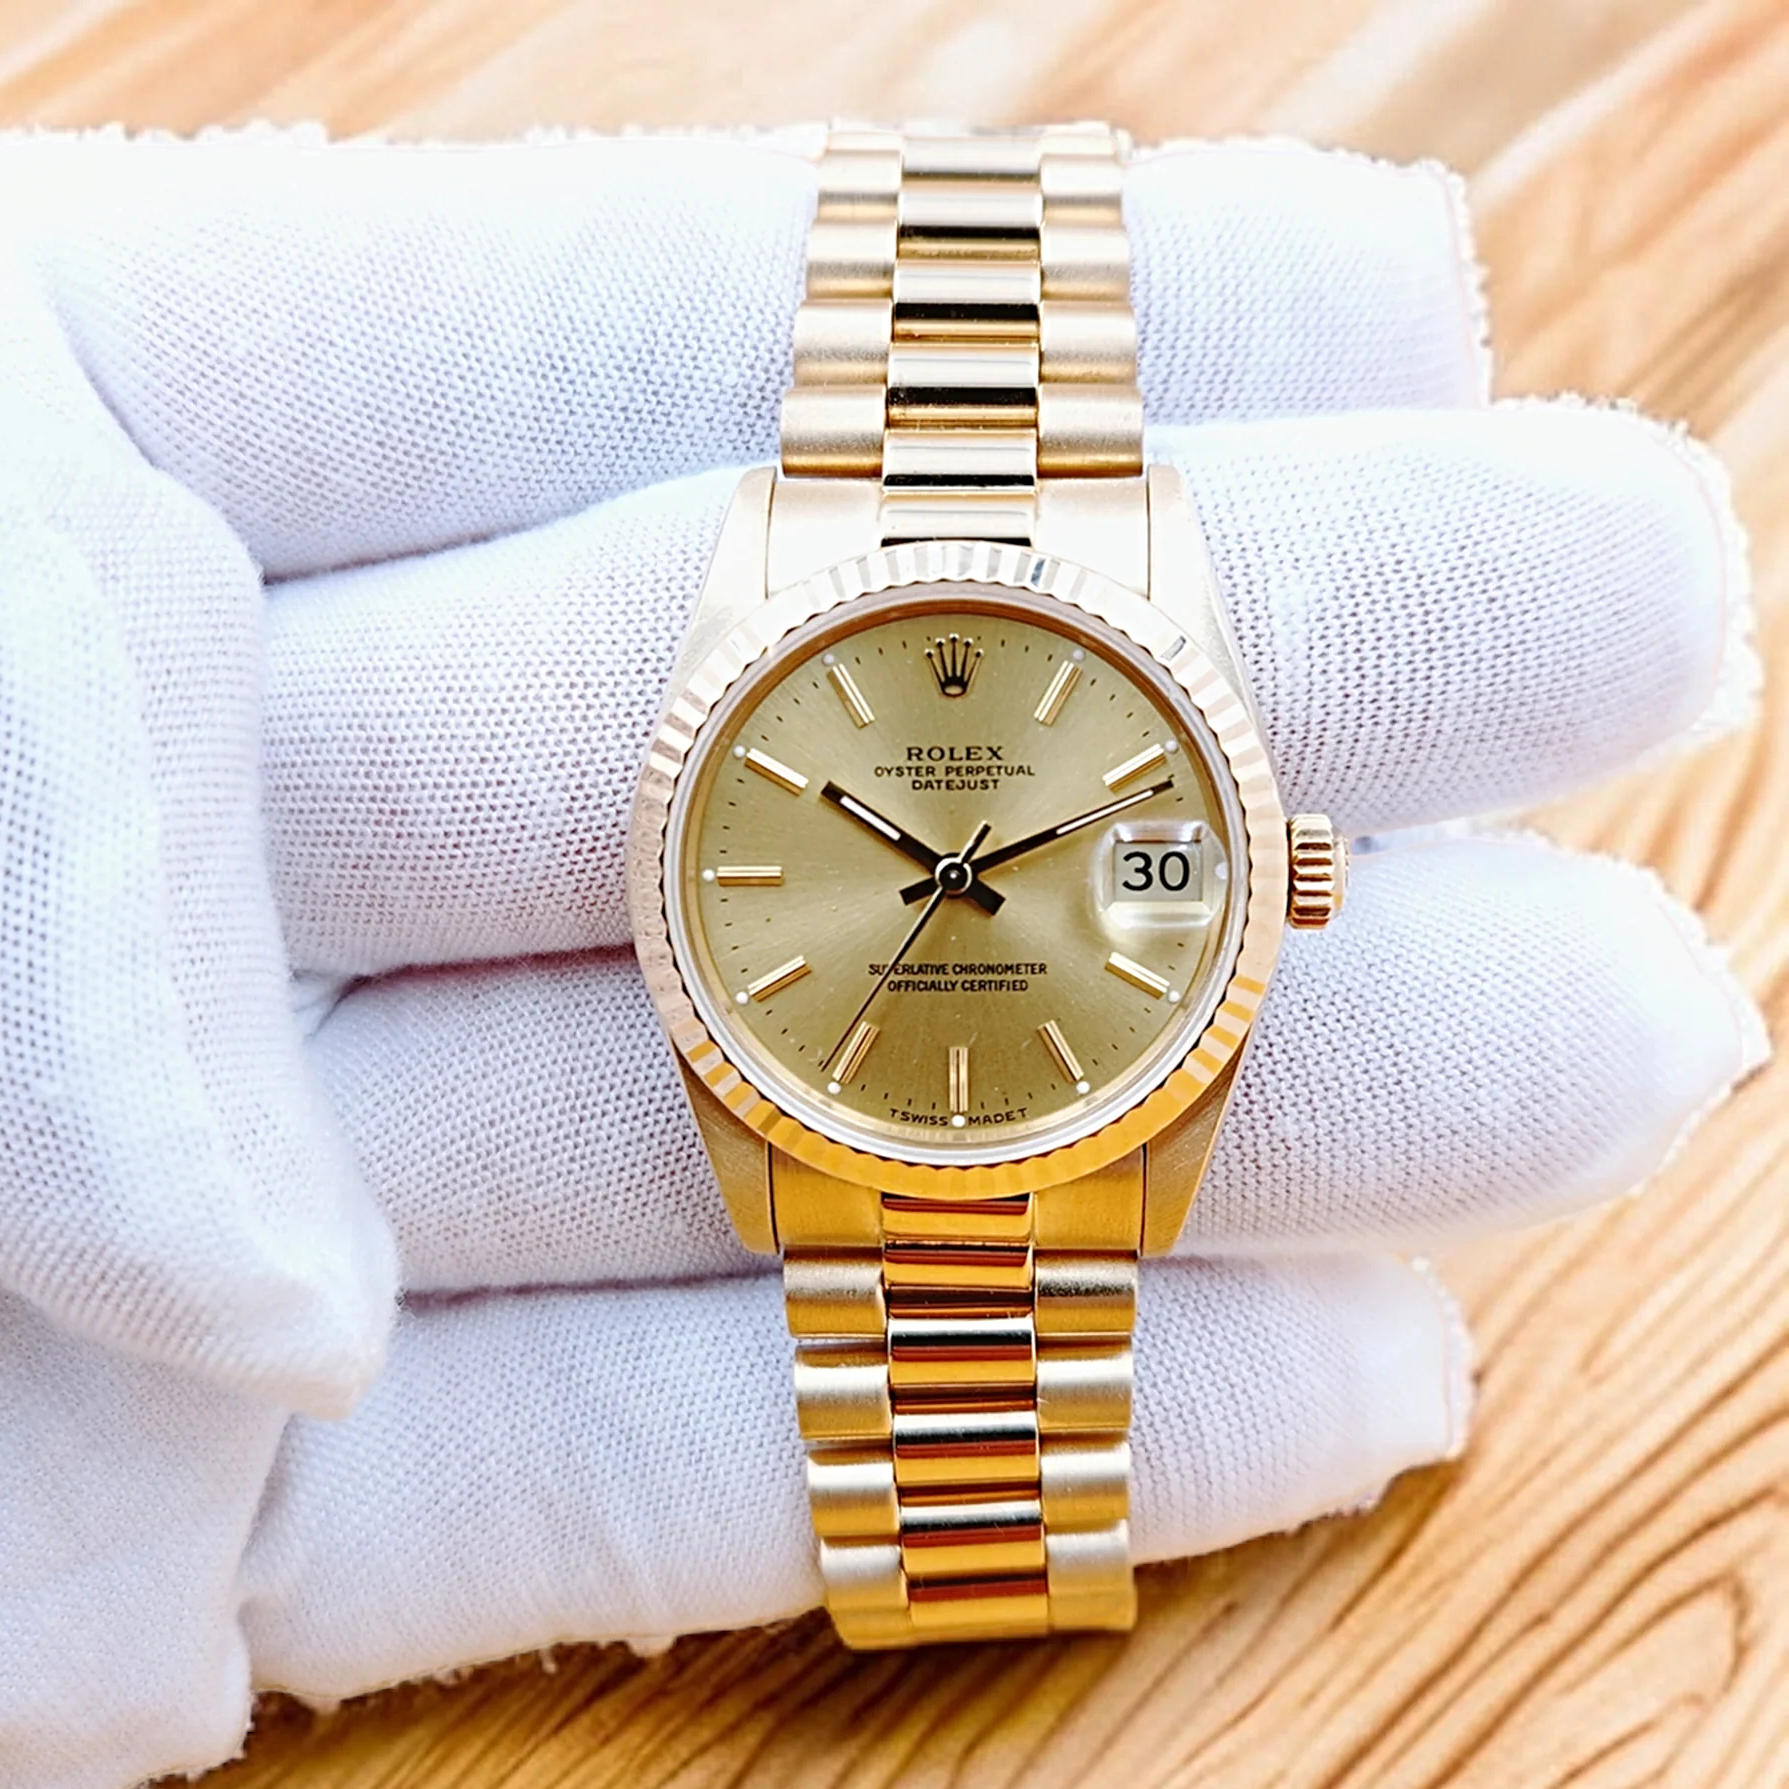 Ladies Rolex 31mm Midsize Presidential 18K Solid Yellow Gold Wristwatch w/ Champagne Dial & Fluted Bezel. (Pre-Owned 63278)